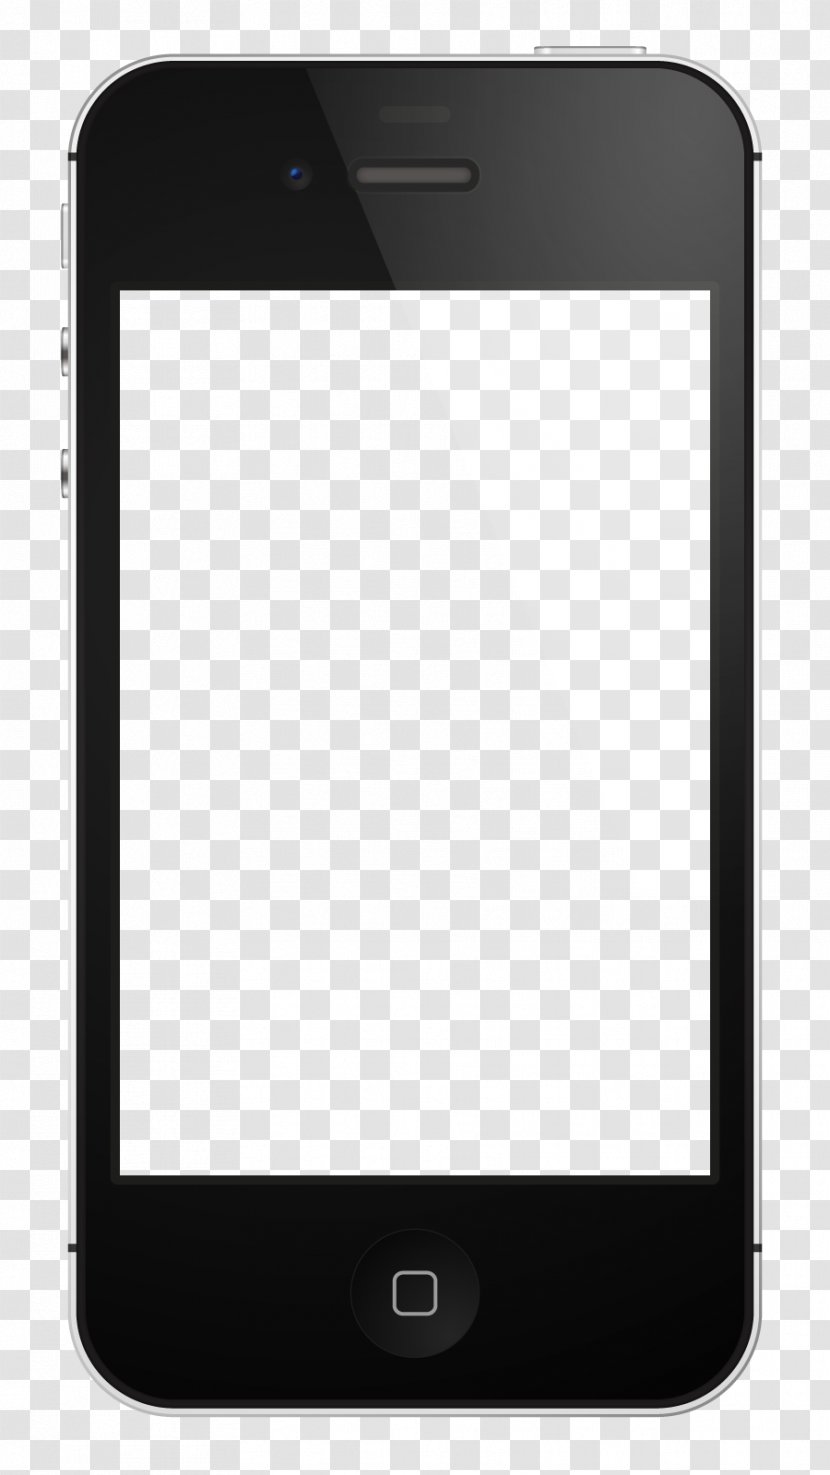 IPhone 4S 6 5 X - Iphone 4s - Template Transparent PNG